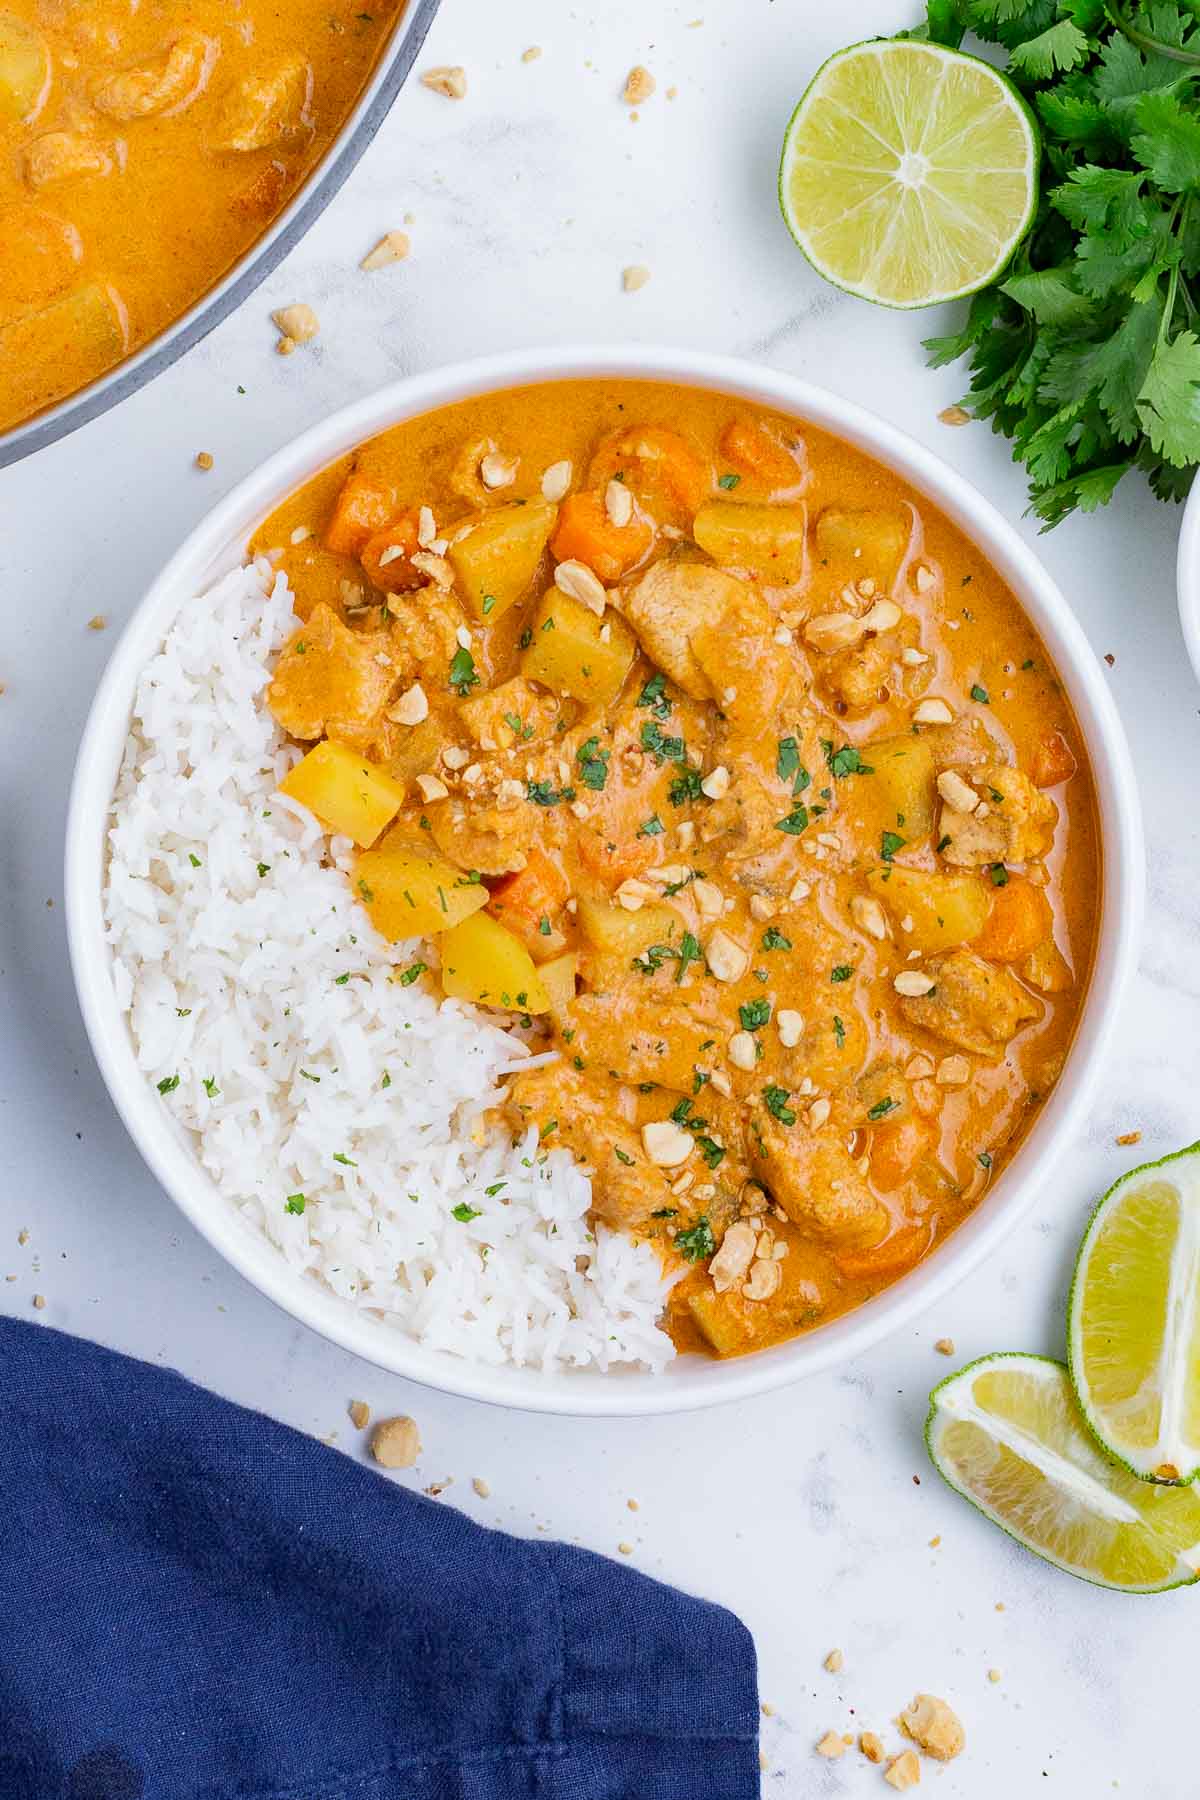 Massaman curry is slightly spicy and super delicious with chicken, potatoes, and carrots.